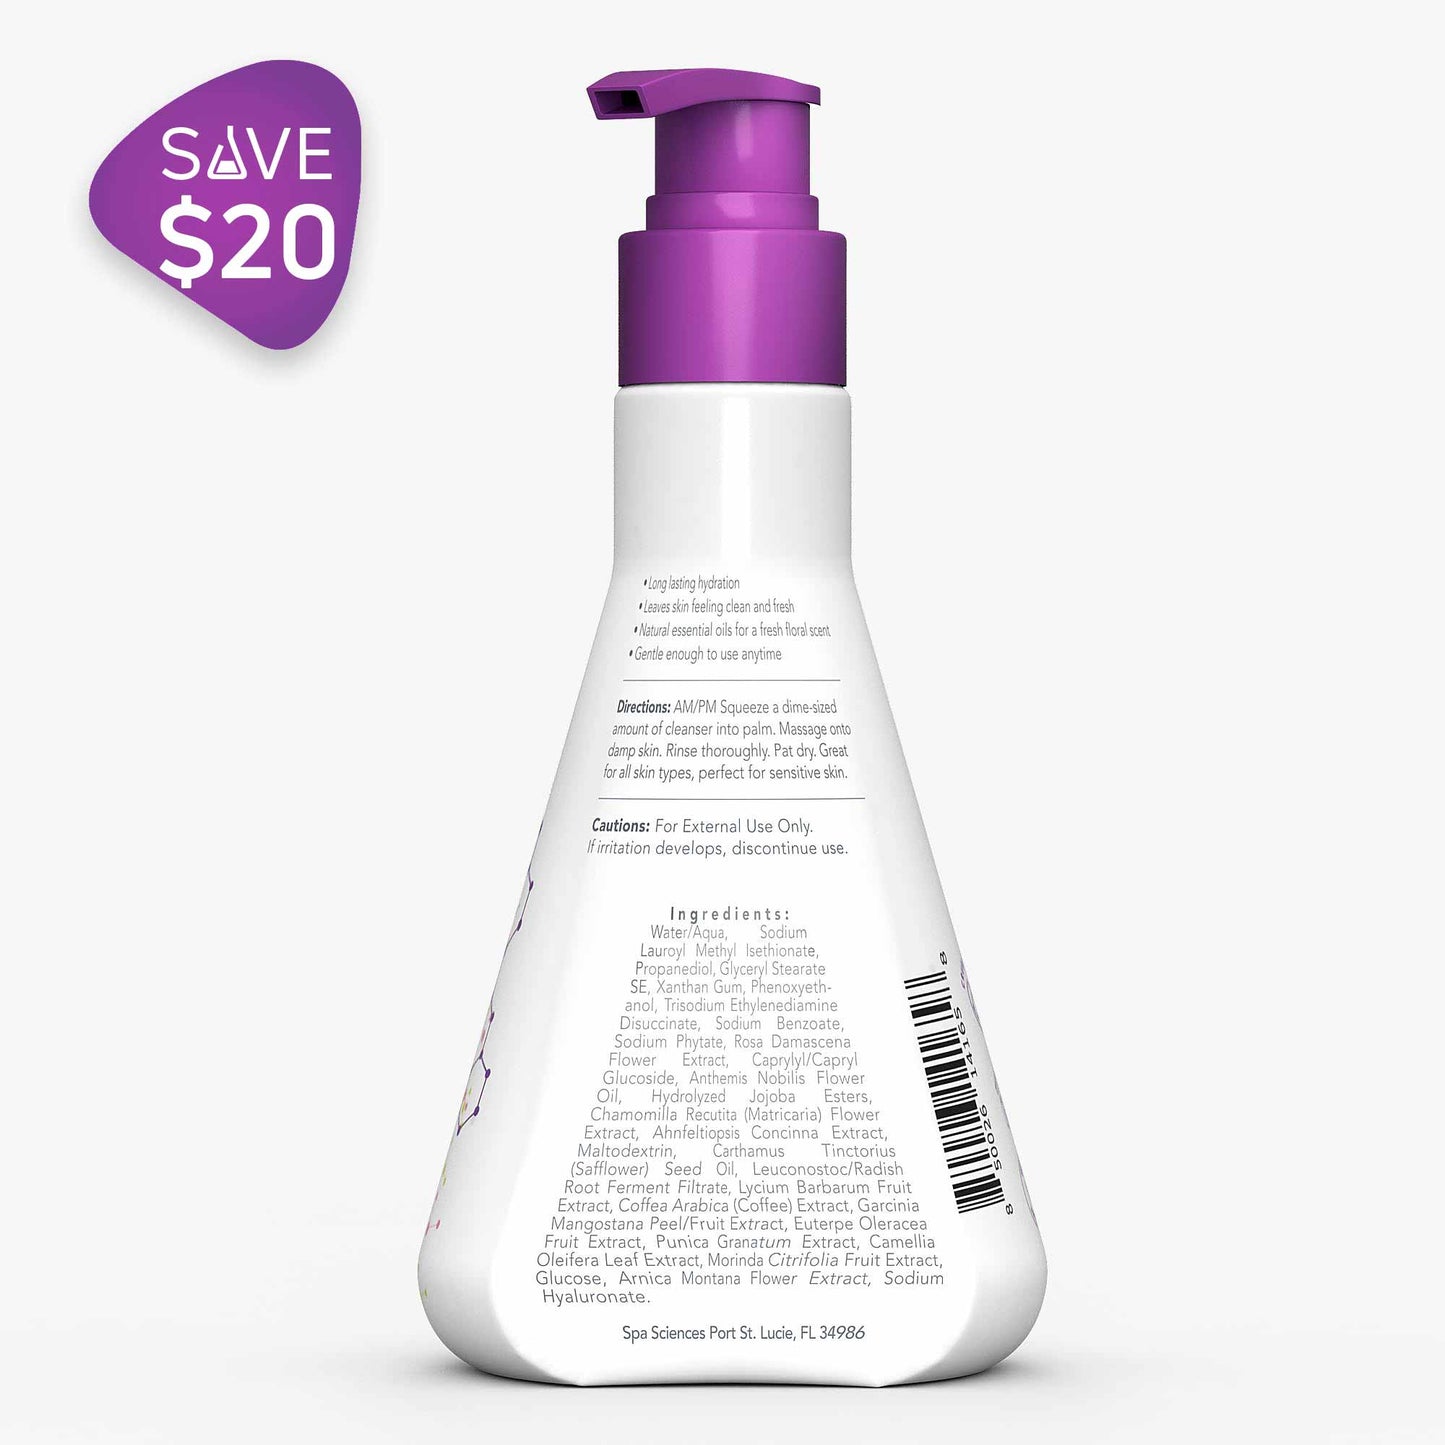 A bottle of Spa Sciences Starter Pack for All lotion with a purple label on it.